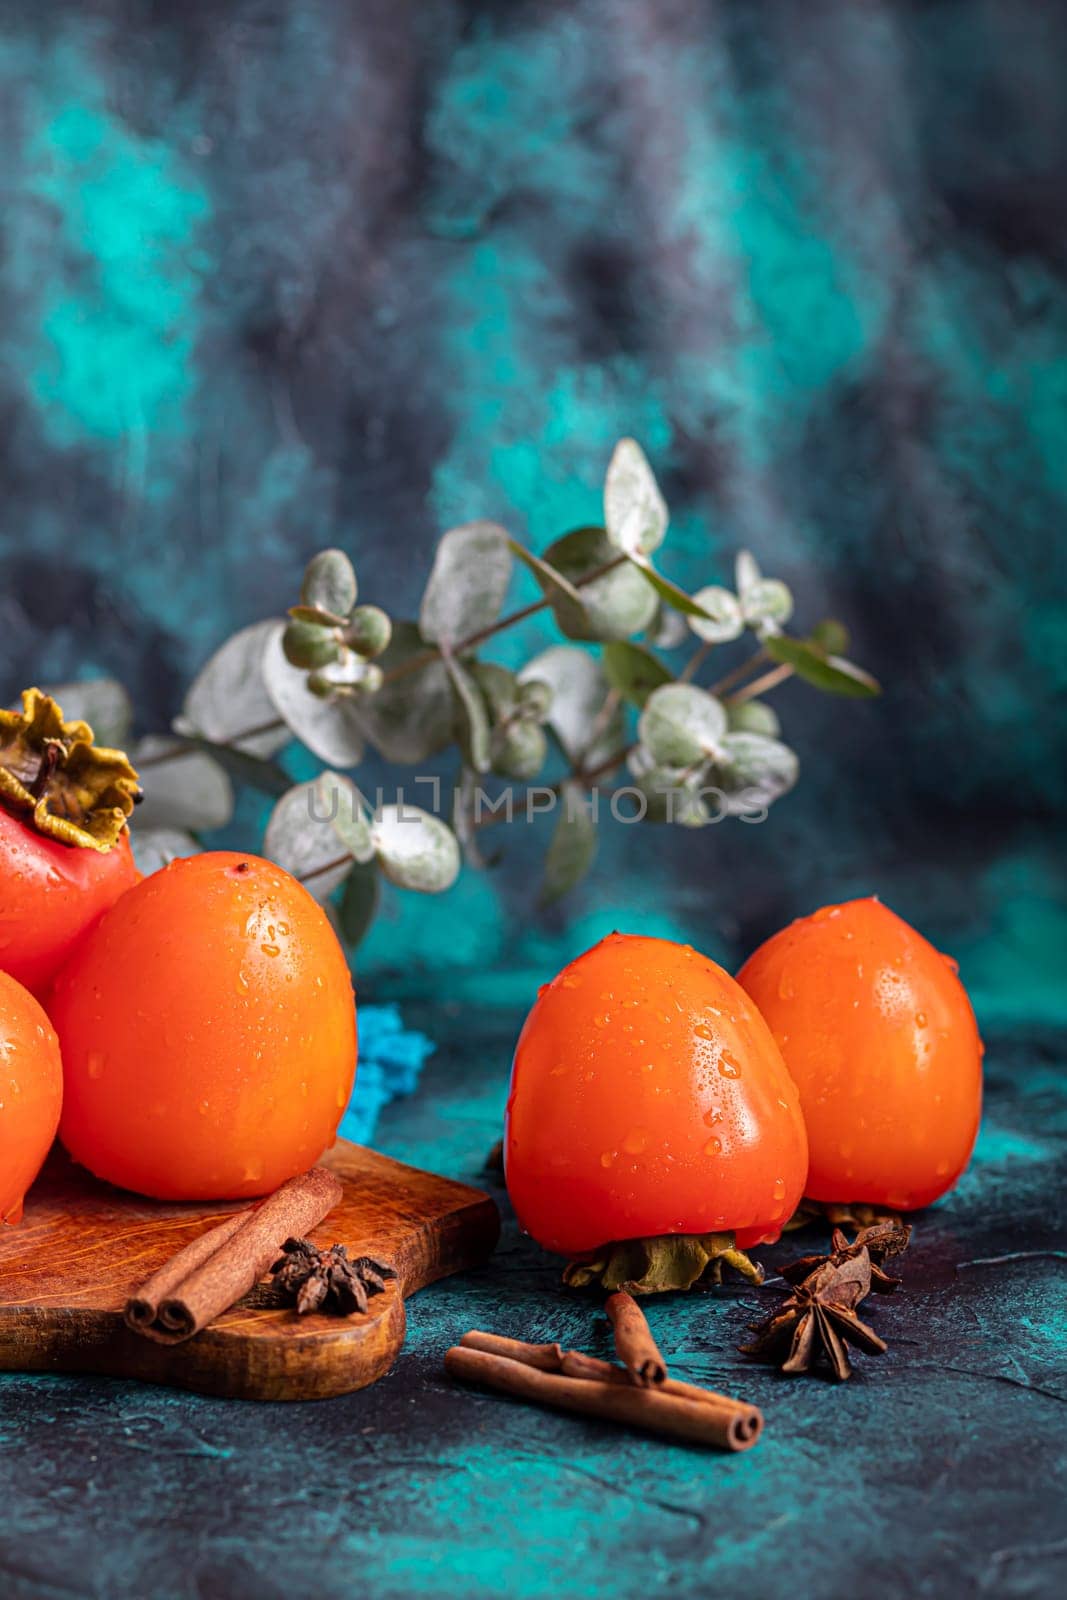 Persimmon on a dark background. Fresh, ripe fruits on a blue plate and in a box. Healthy eating.